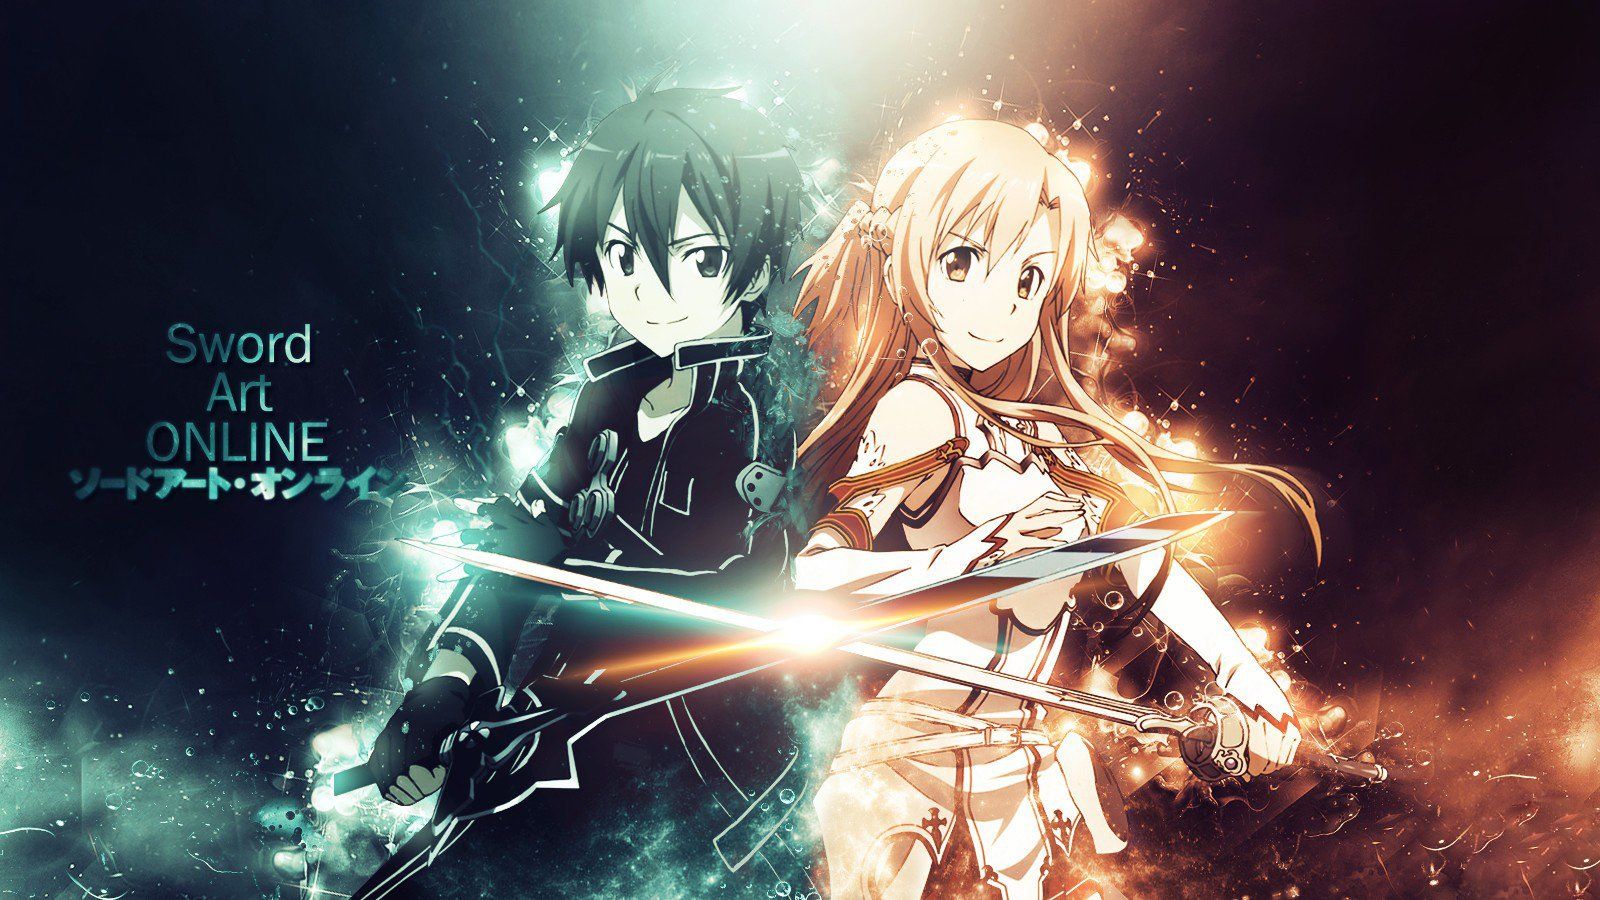 Live With A Sword Art Online Girl (RP) by SonicShadow3459 on DeviantArt